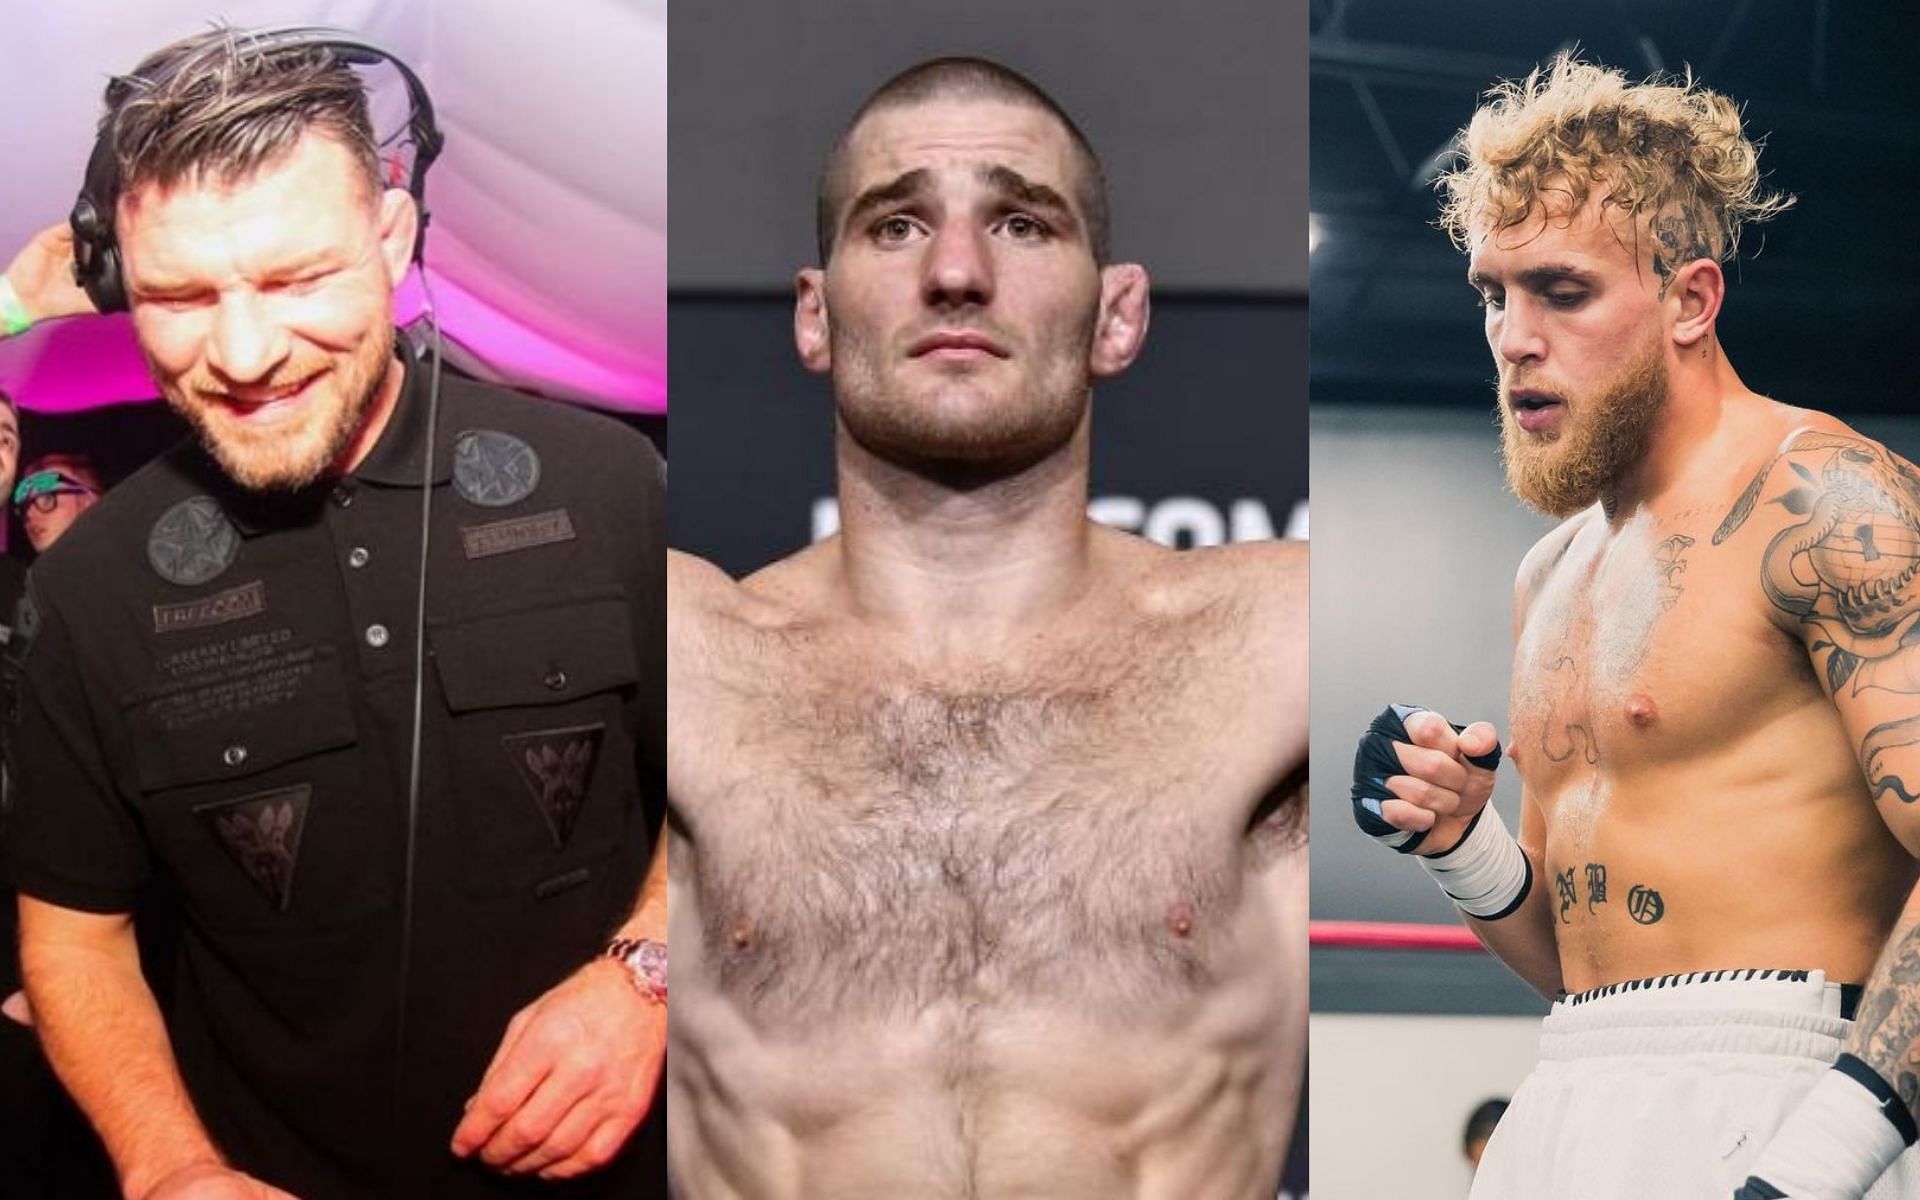 Michael Bisping (left), Sean Strickland (middle), Jake Paul (right) [Image Courtesy: @mikebisping, @ufc, and @jakepaul]